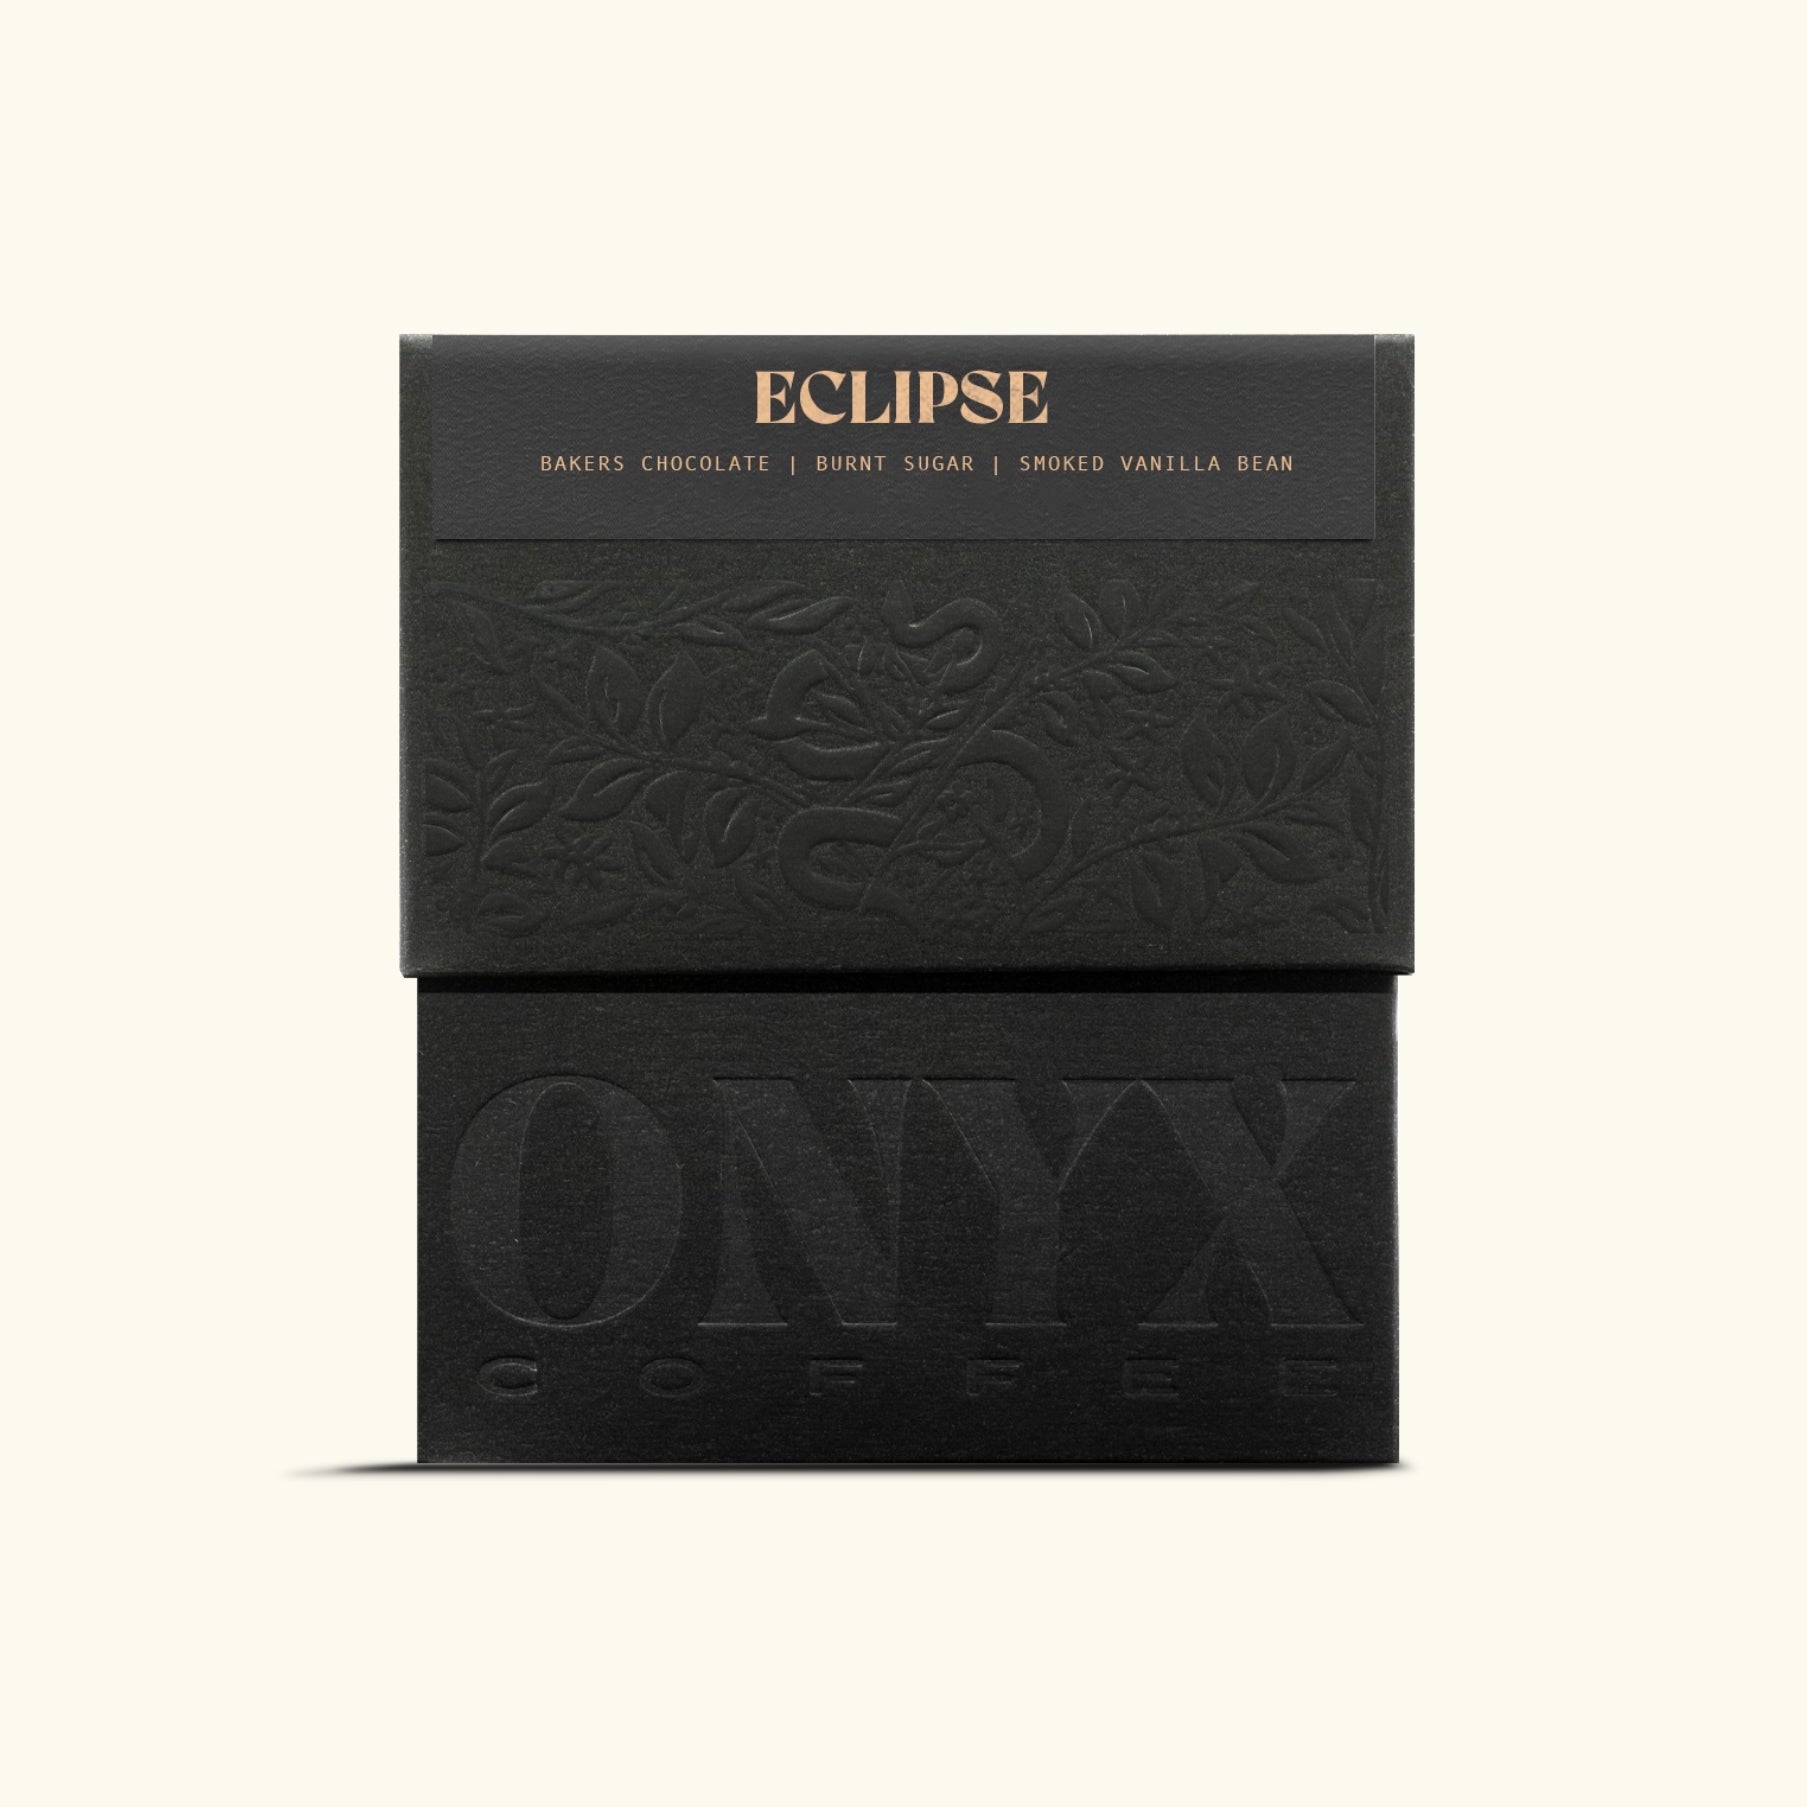 black onyx eclipse coffee packaging with embossed print